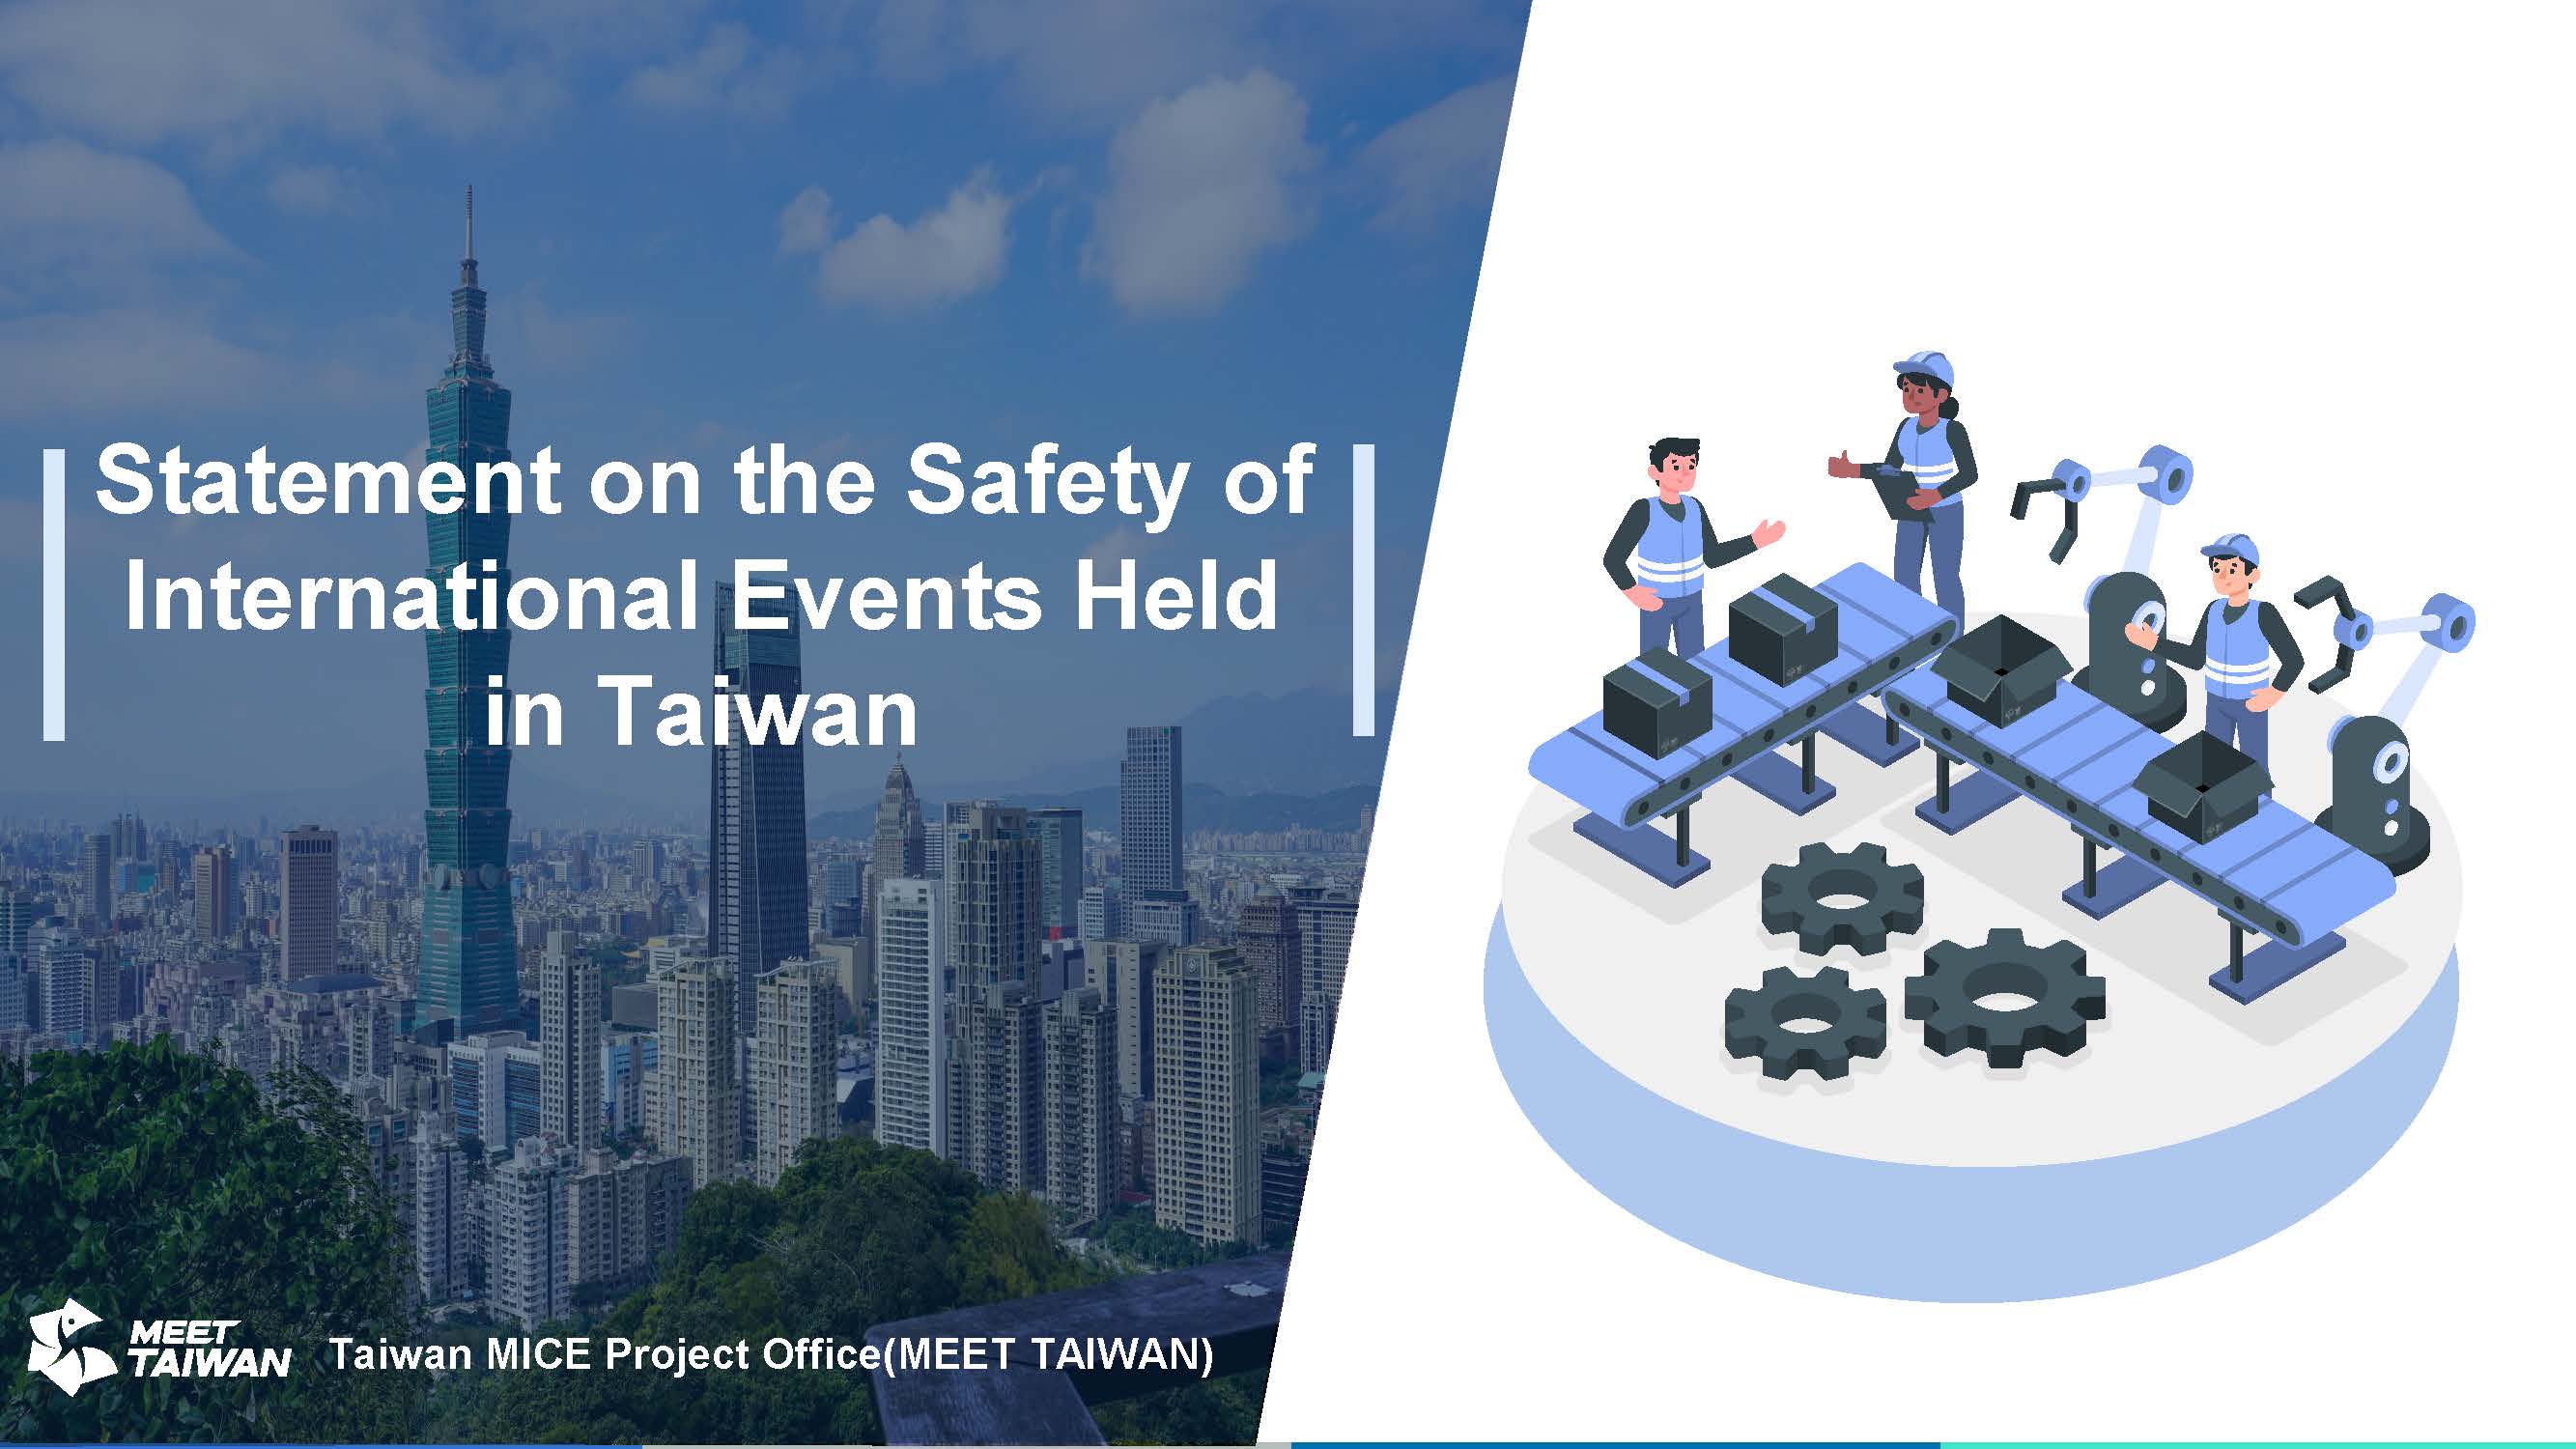 Statement on the Safety of International Events Held in Taiwan _PPT__01.jpg